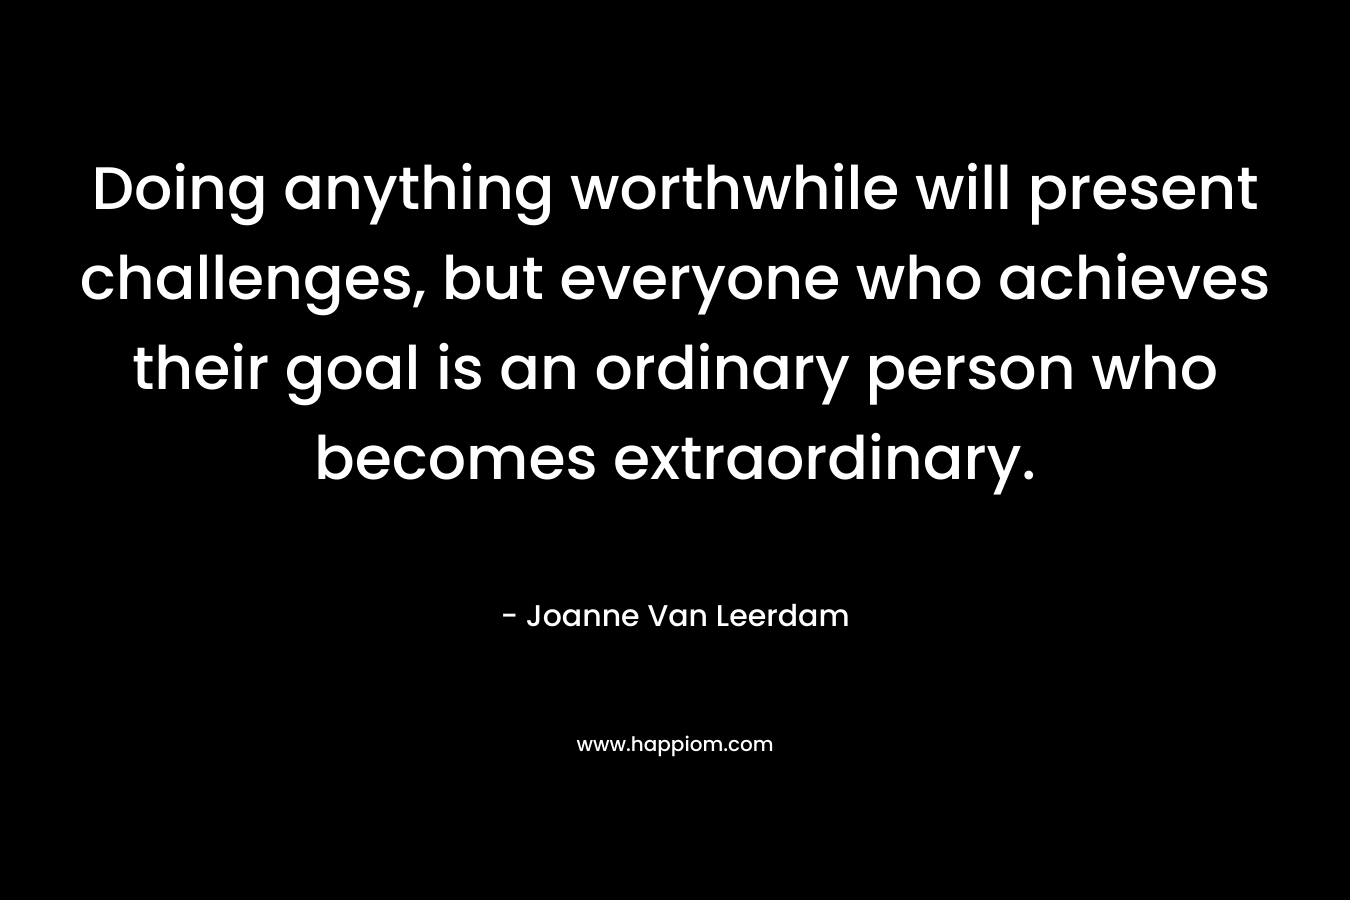 Doing anything worthwhile will present challenges, but everyone who achieves their goal is an ordinary person who becomes extraordinary. – Joanne Van Leerdam